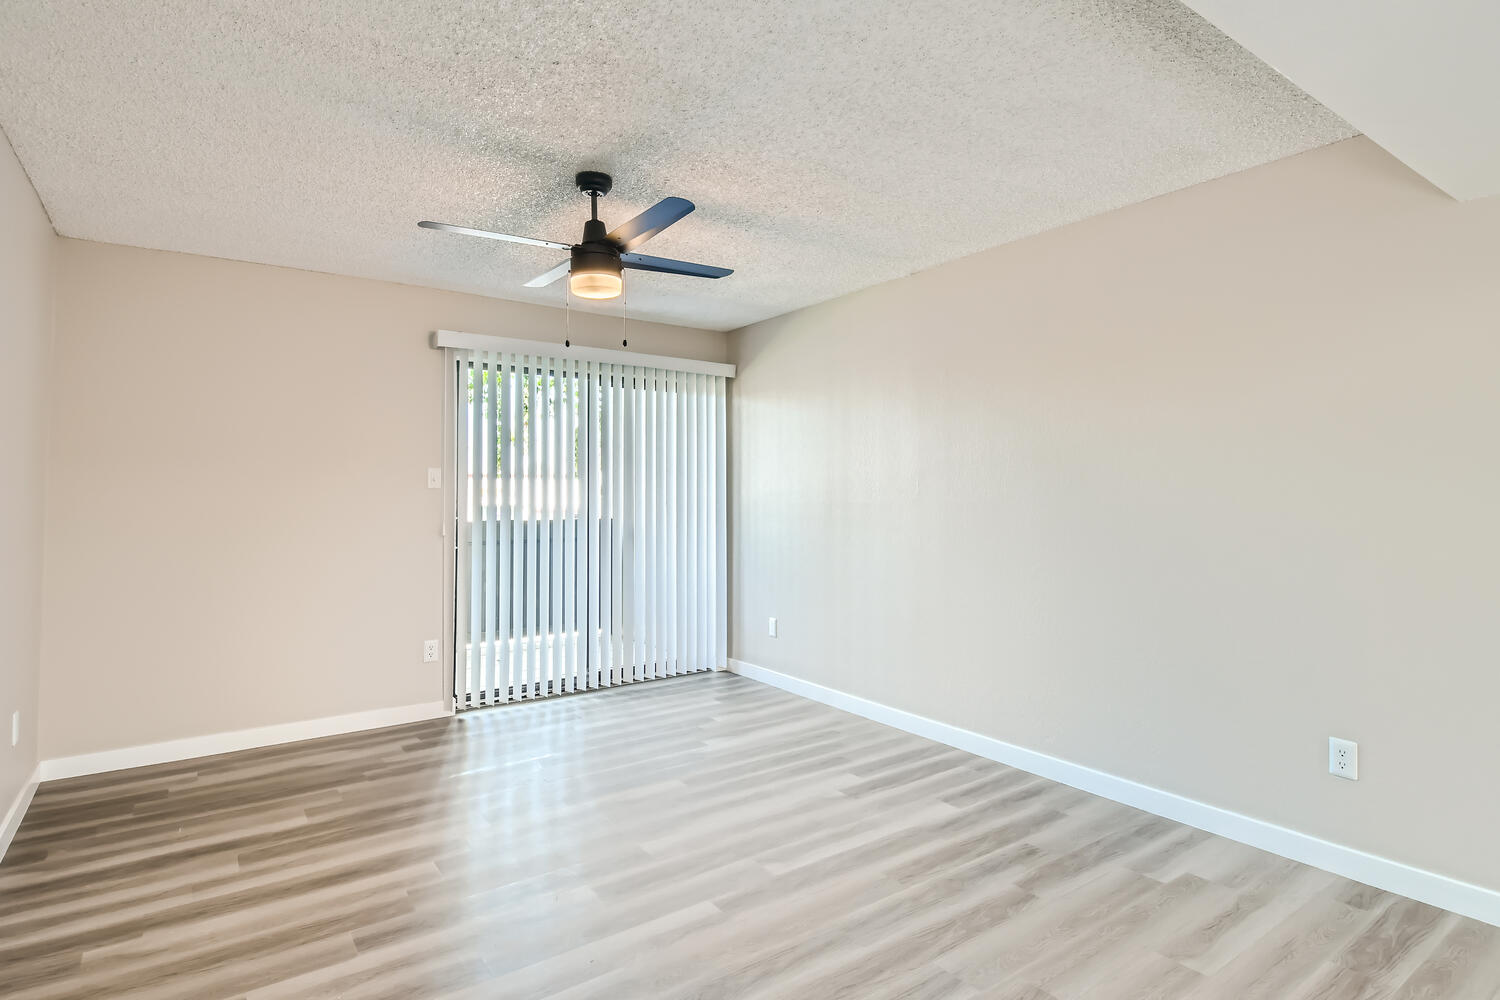 An apartment living room with sliding glass doors leading to the balcony at Rise on MClintock.